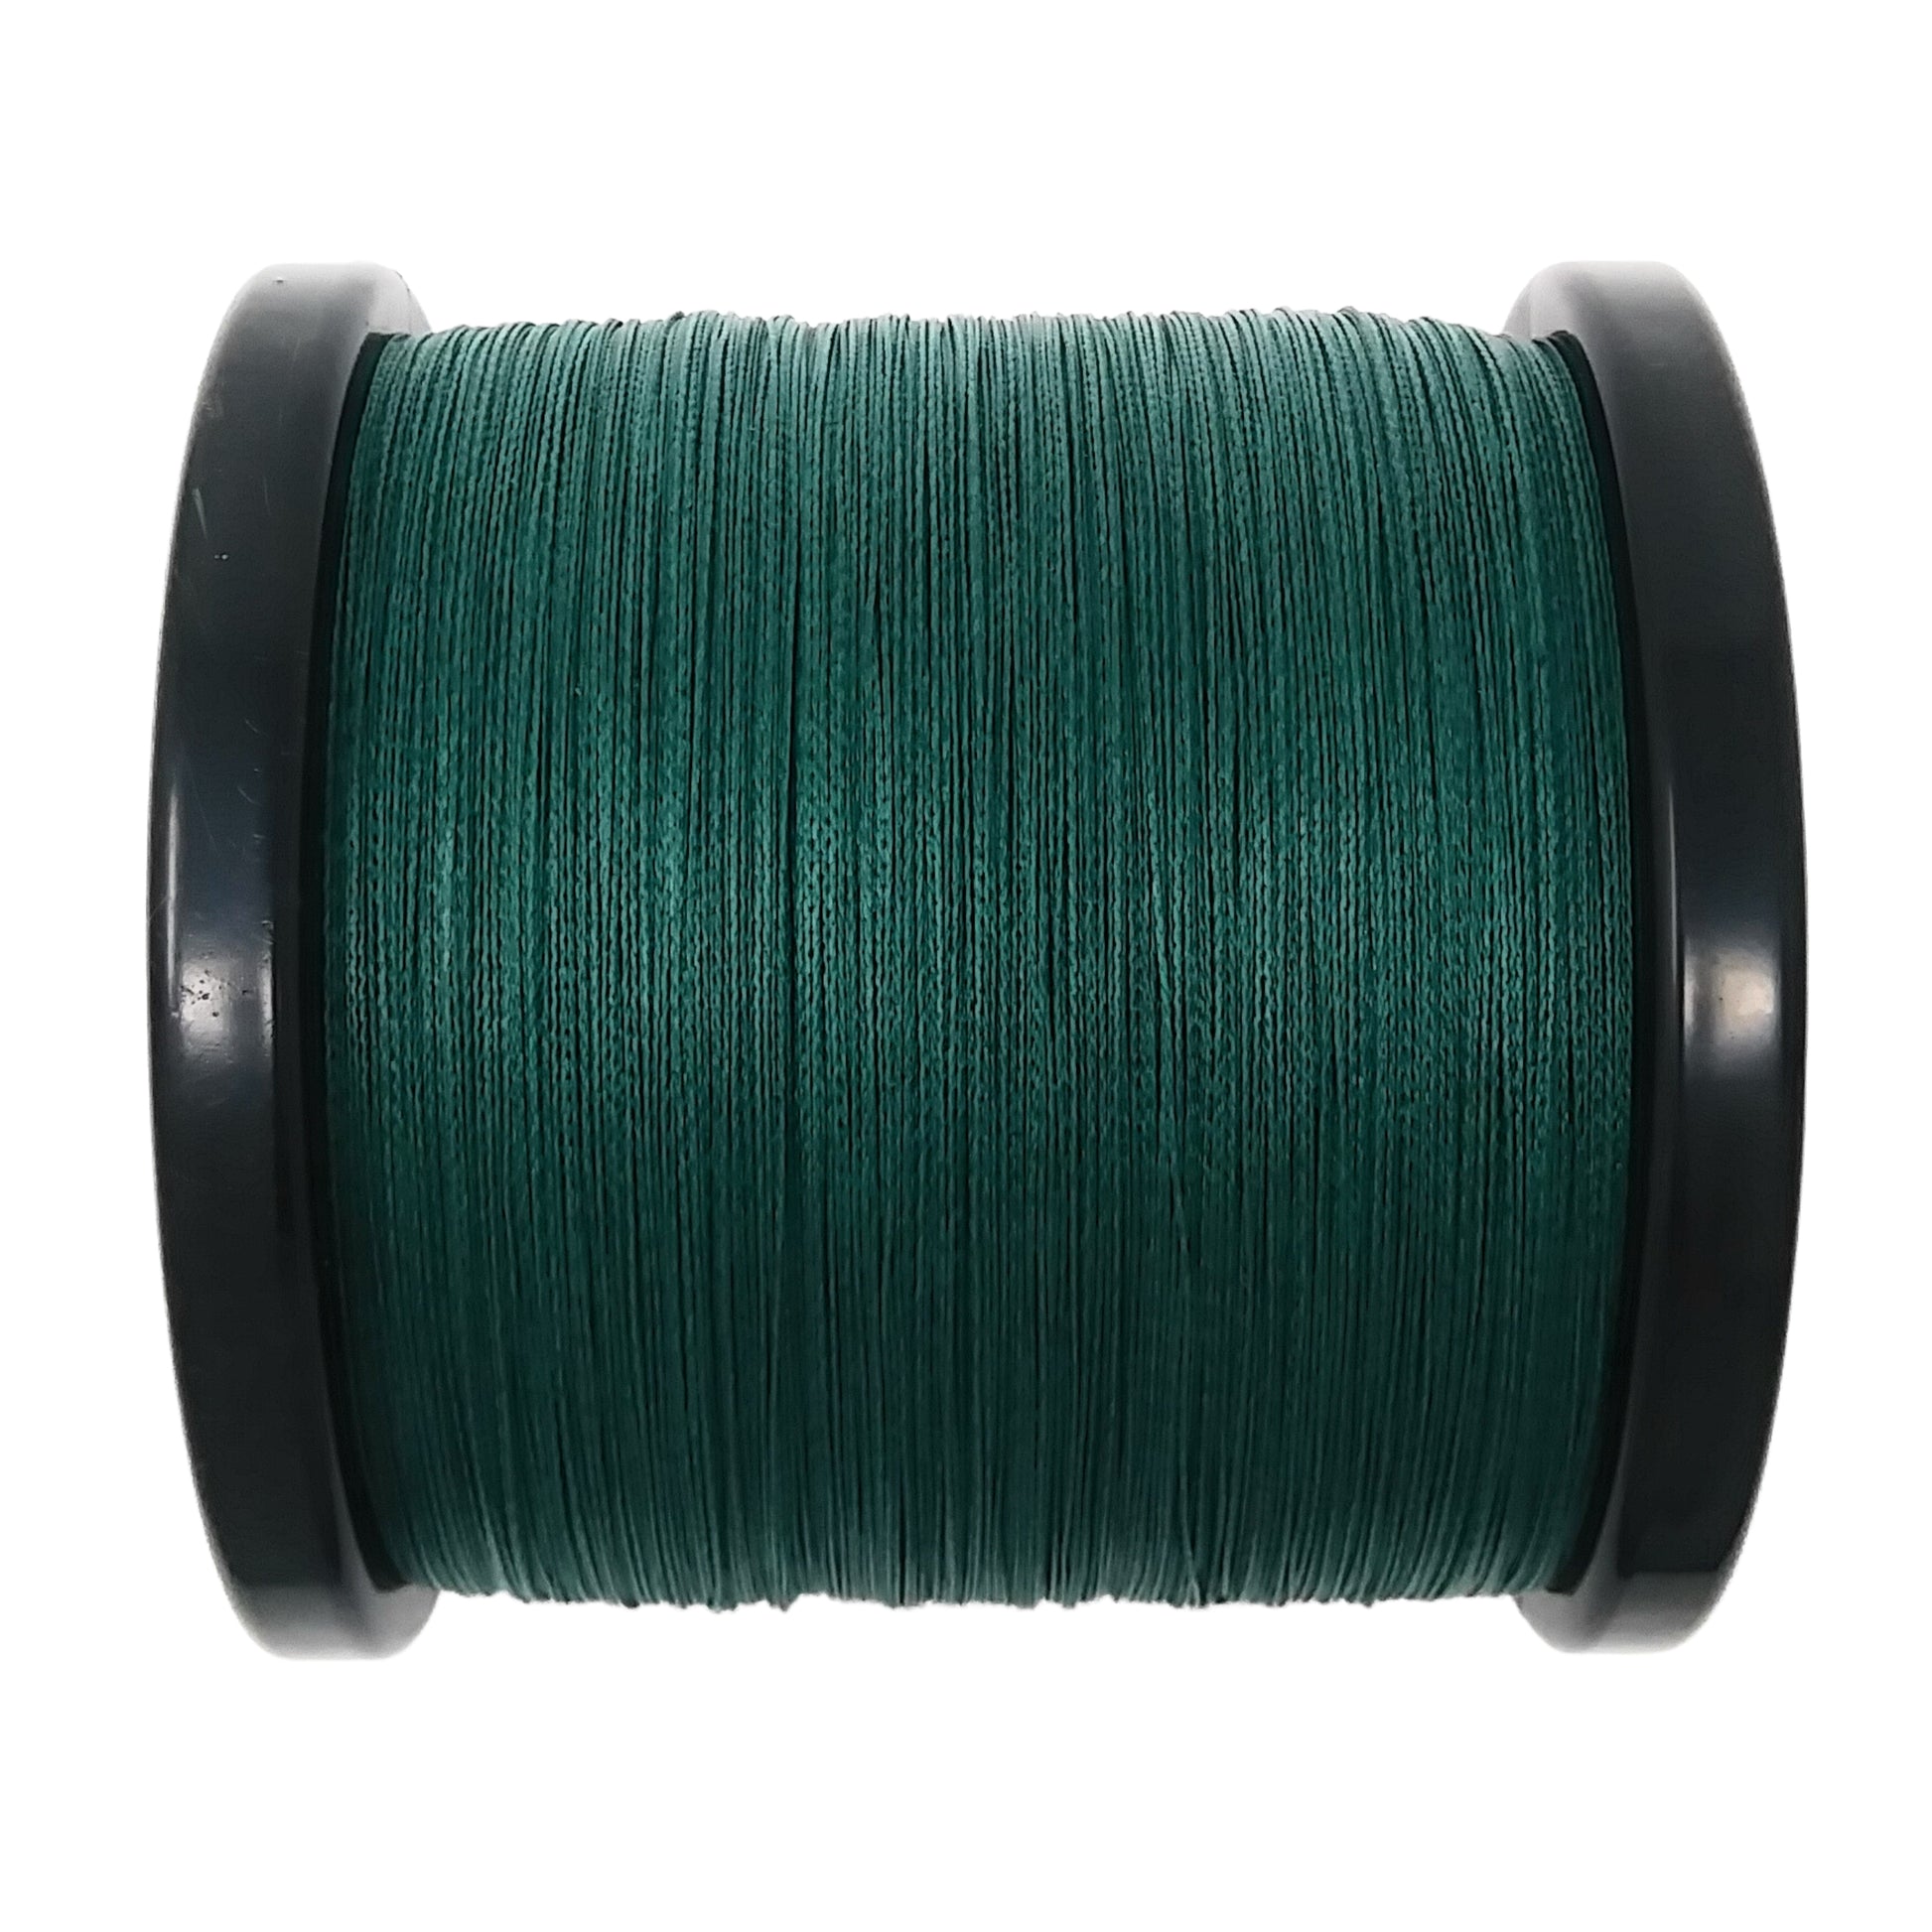 Reaction Tackle Braided Fishing Line - Pro Grade Power Performance for  Saltwater or Freshwater - Colored Diamond Braid for Ex